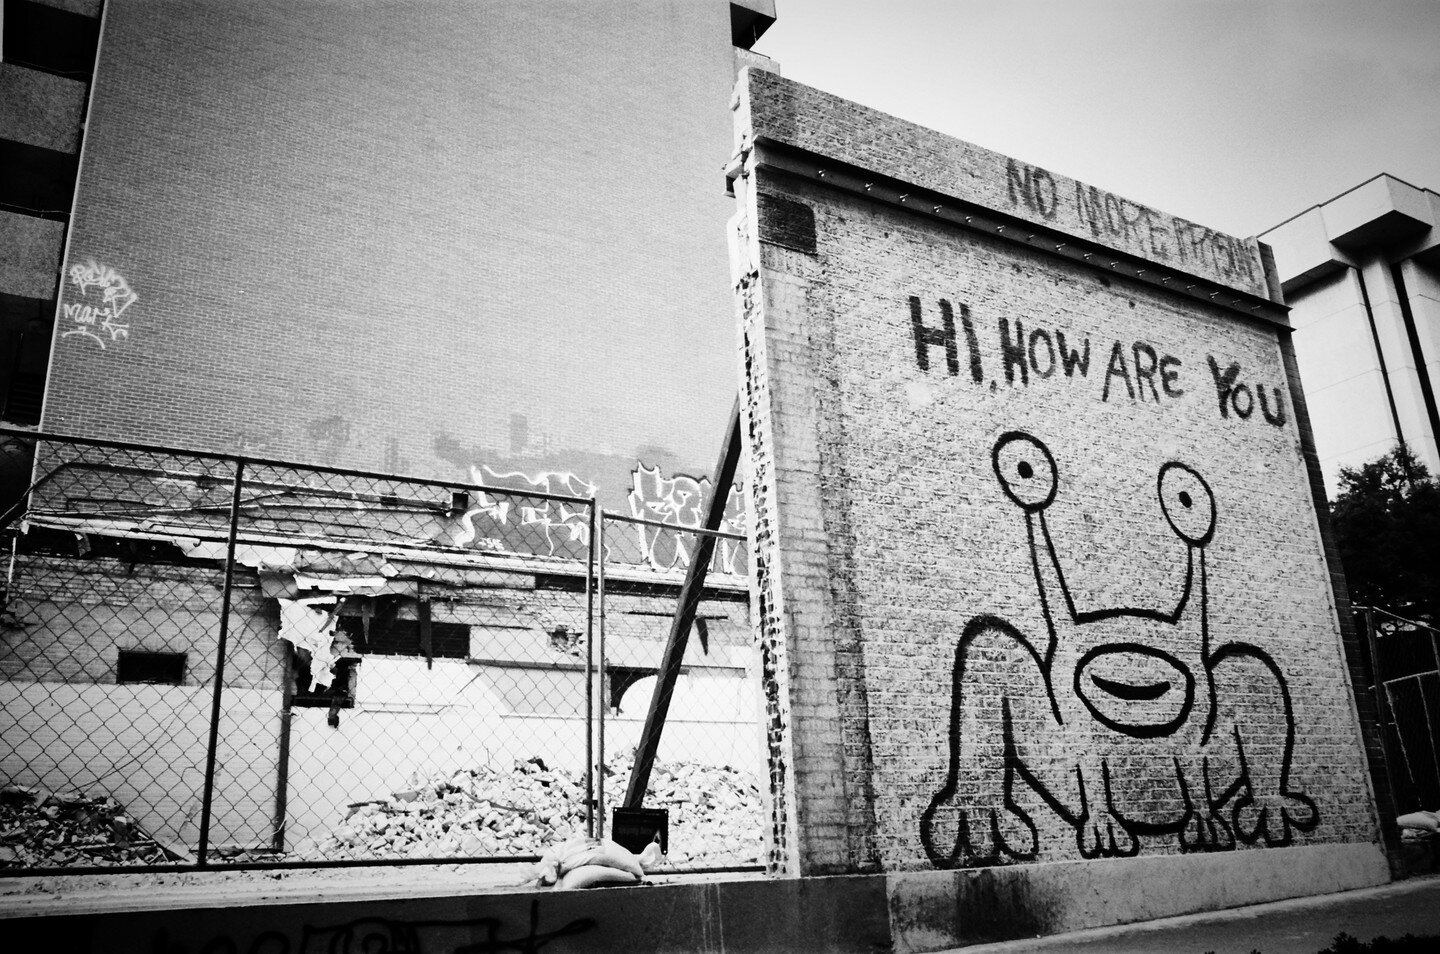 The remnants of the &quot;Jeremiah the Innocent&quot; mural, originally the cover art for Daniel Johnston's 1983 album &quot;Hi, How Are You?&quot;

It became Austin's most iconic piece of street art, synonymous with the culture at that time, earning